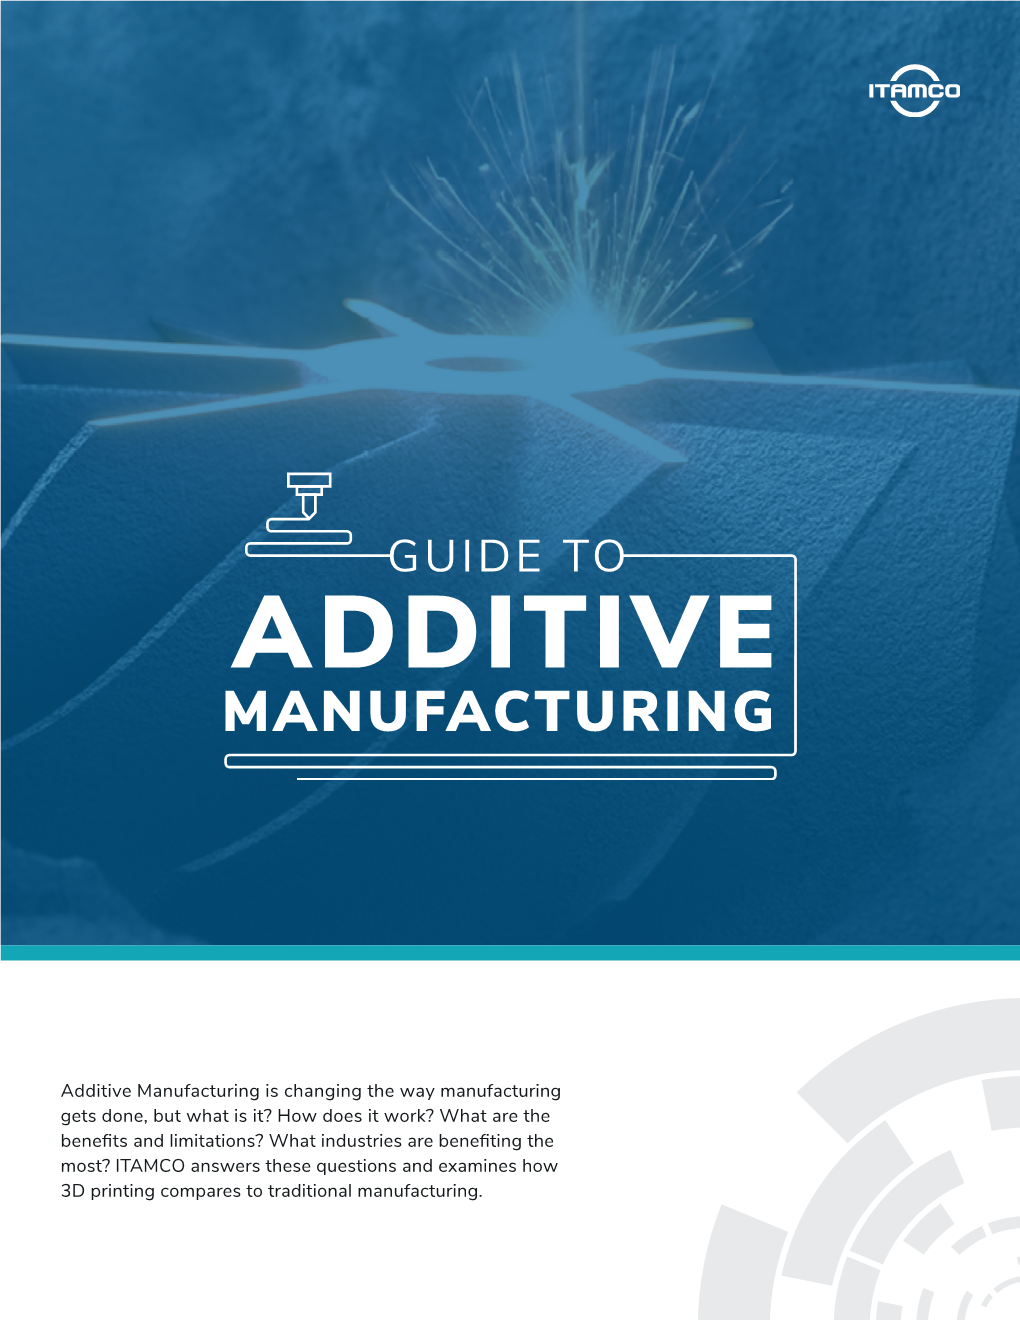 Additive Manufacturing Is Changing the Way Manufacturing